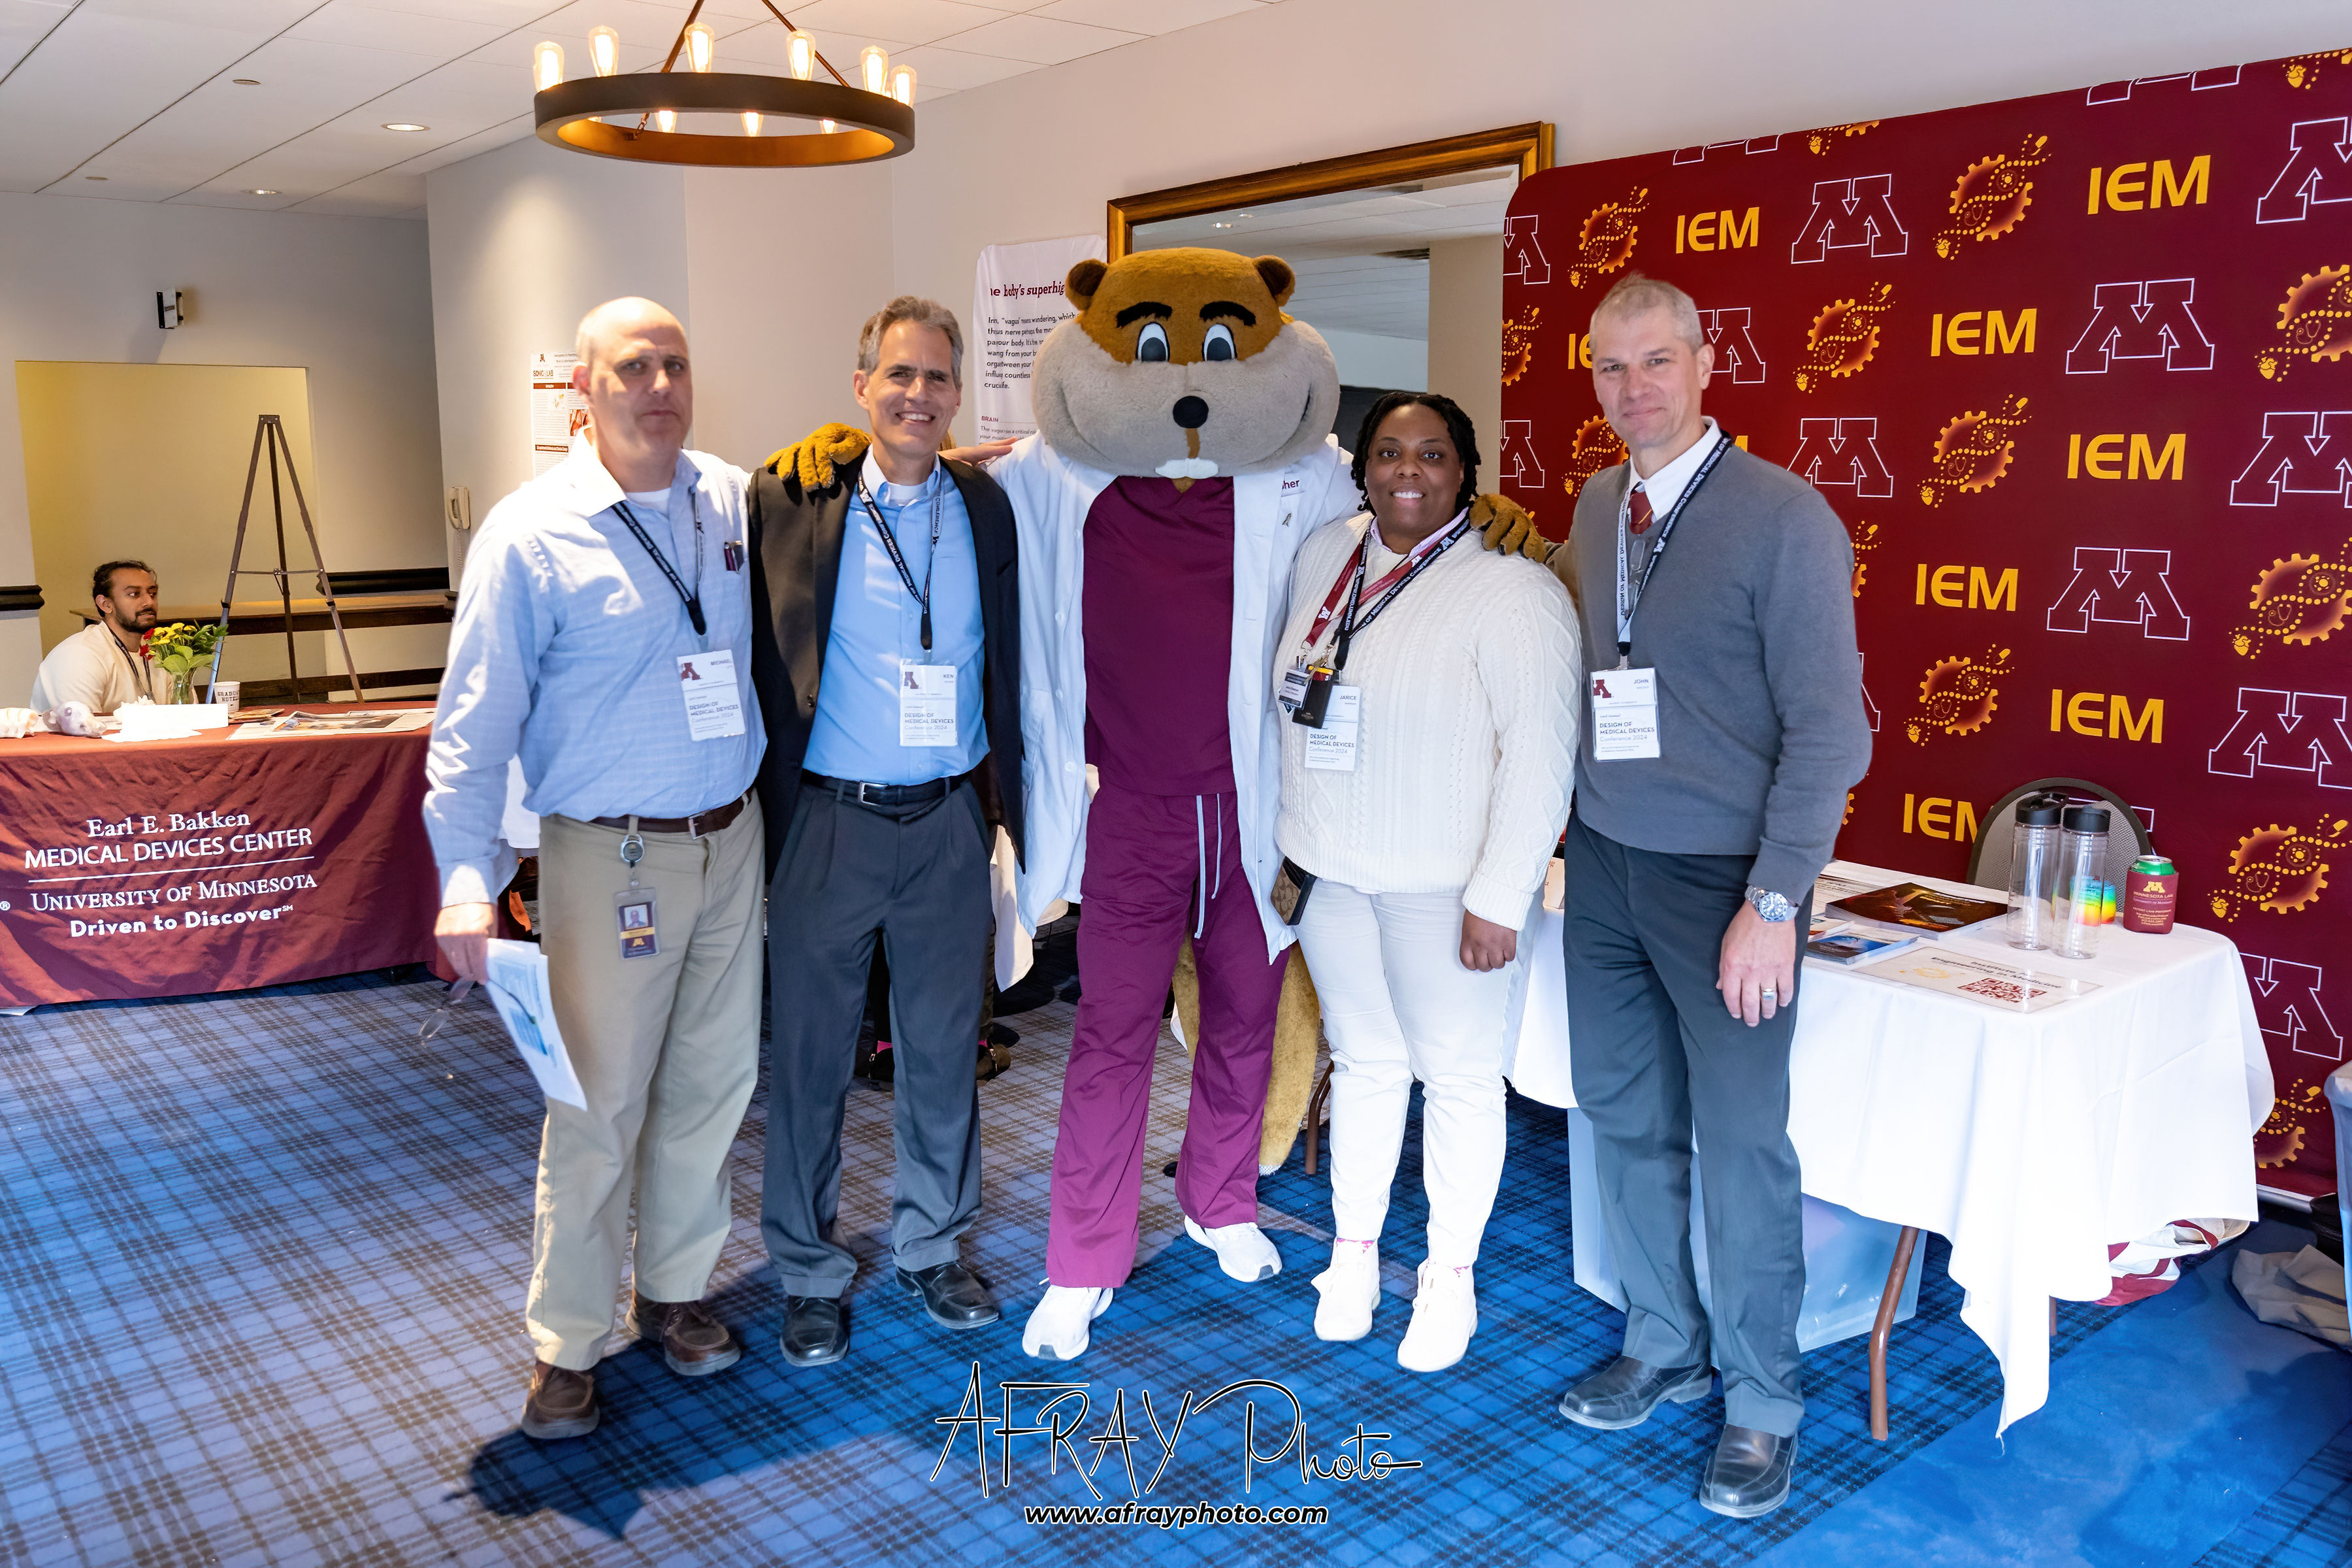 Goldy Gopher stopping by to say hi to the IEM team at 2024 Innovation Week